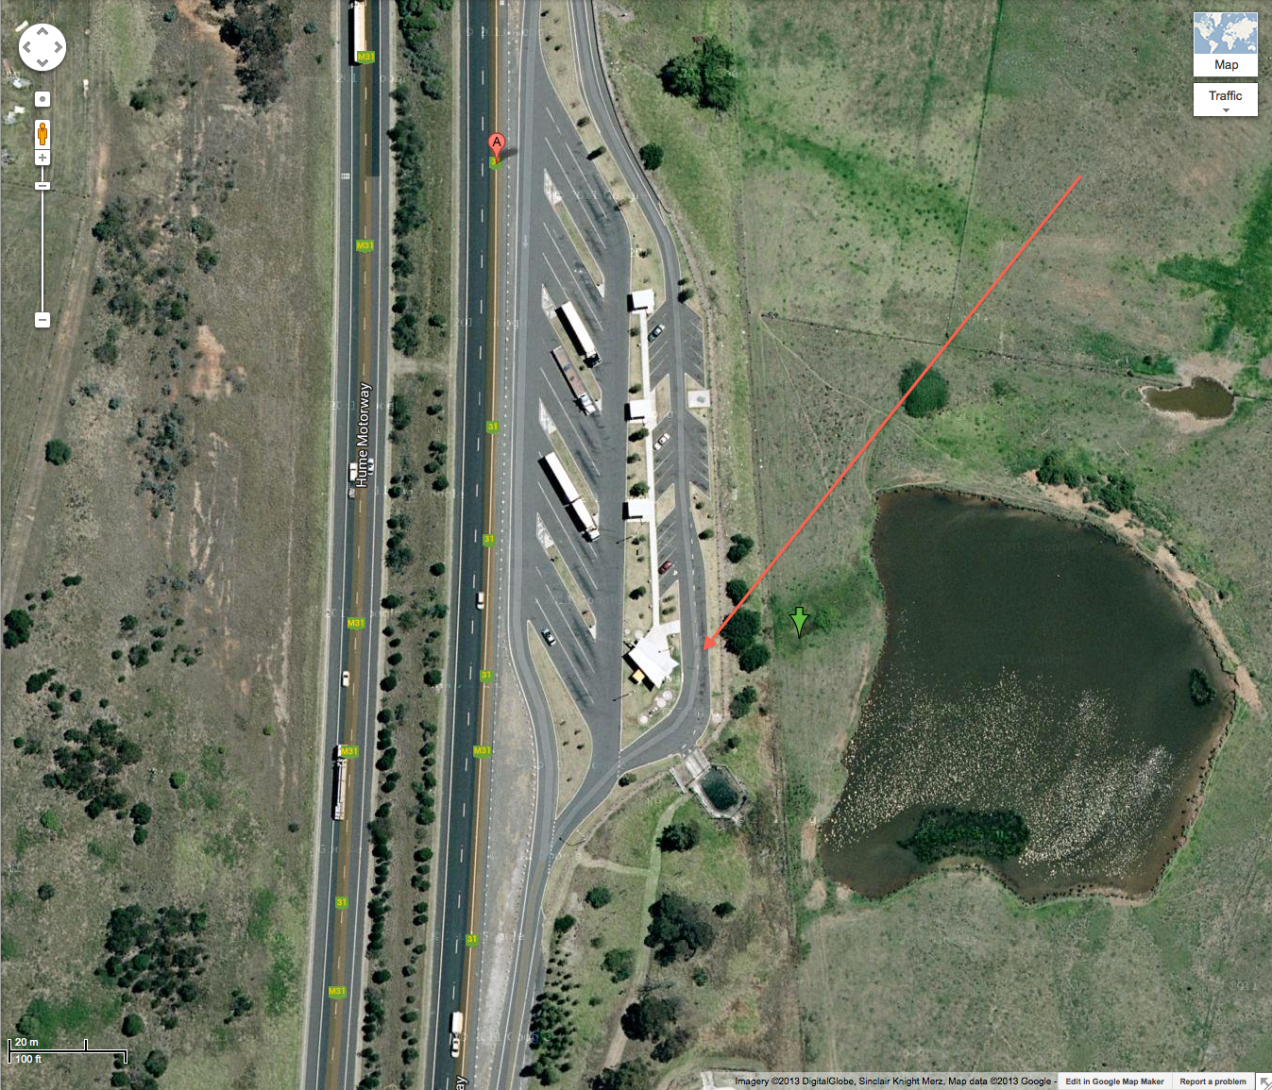 Hume Highway NSW, Douglas Park rest area